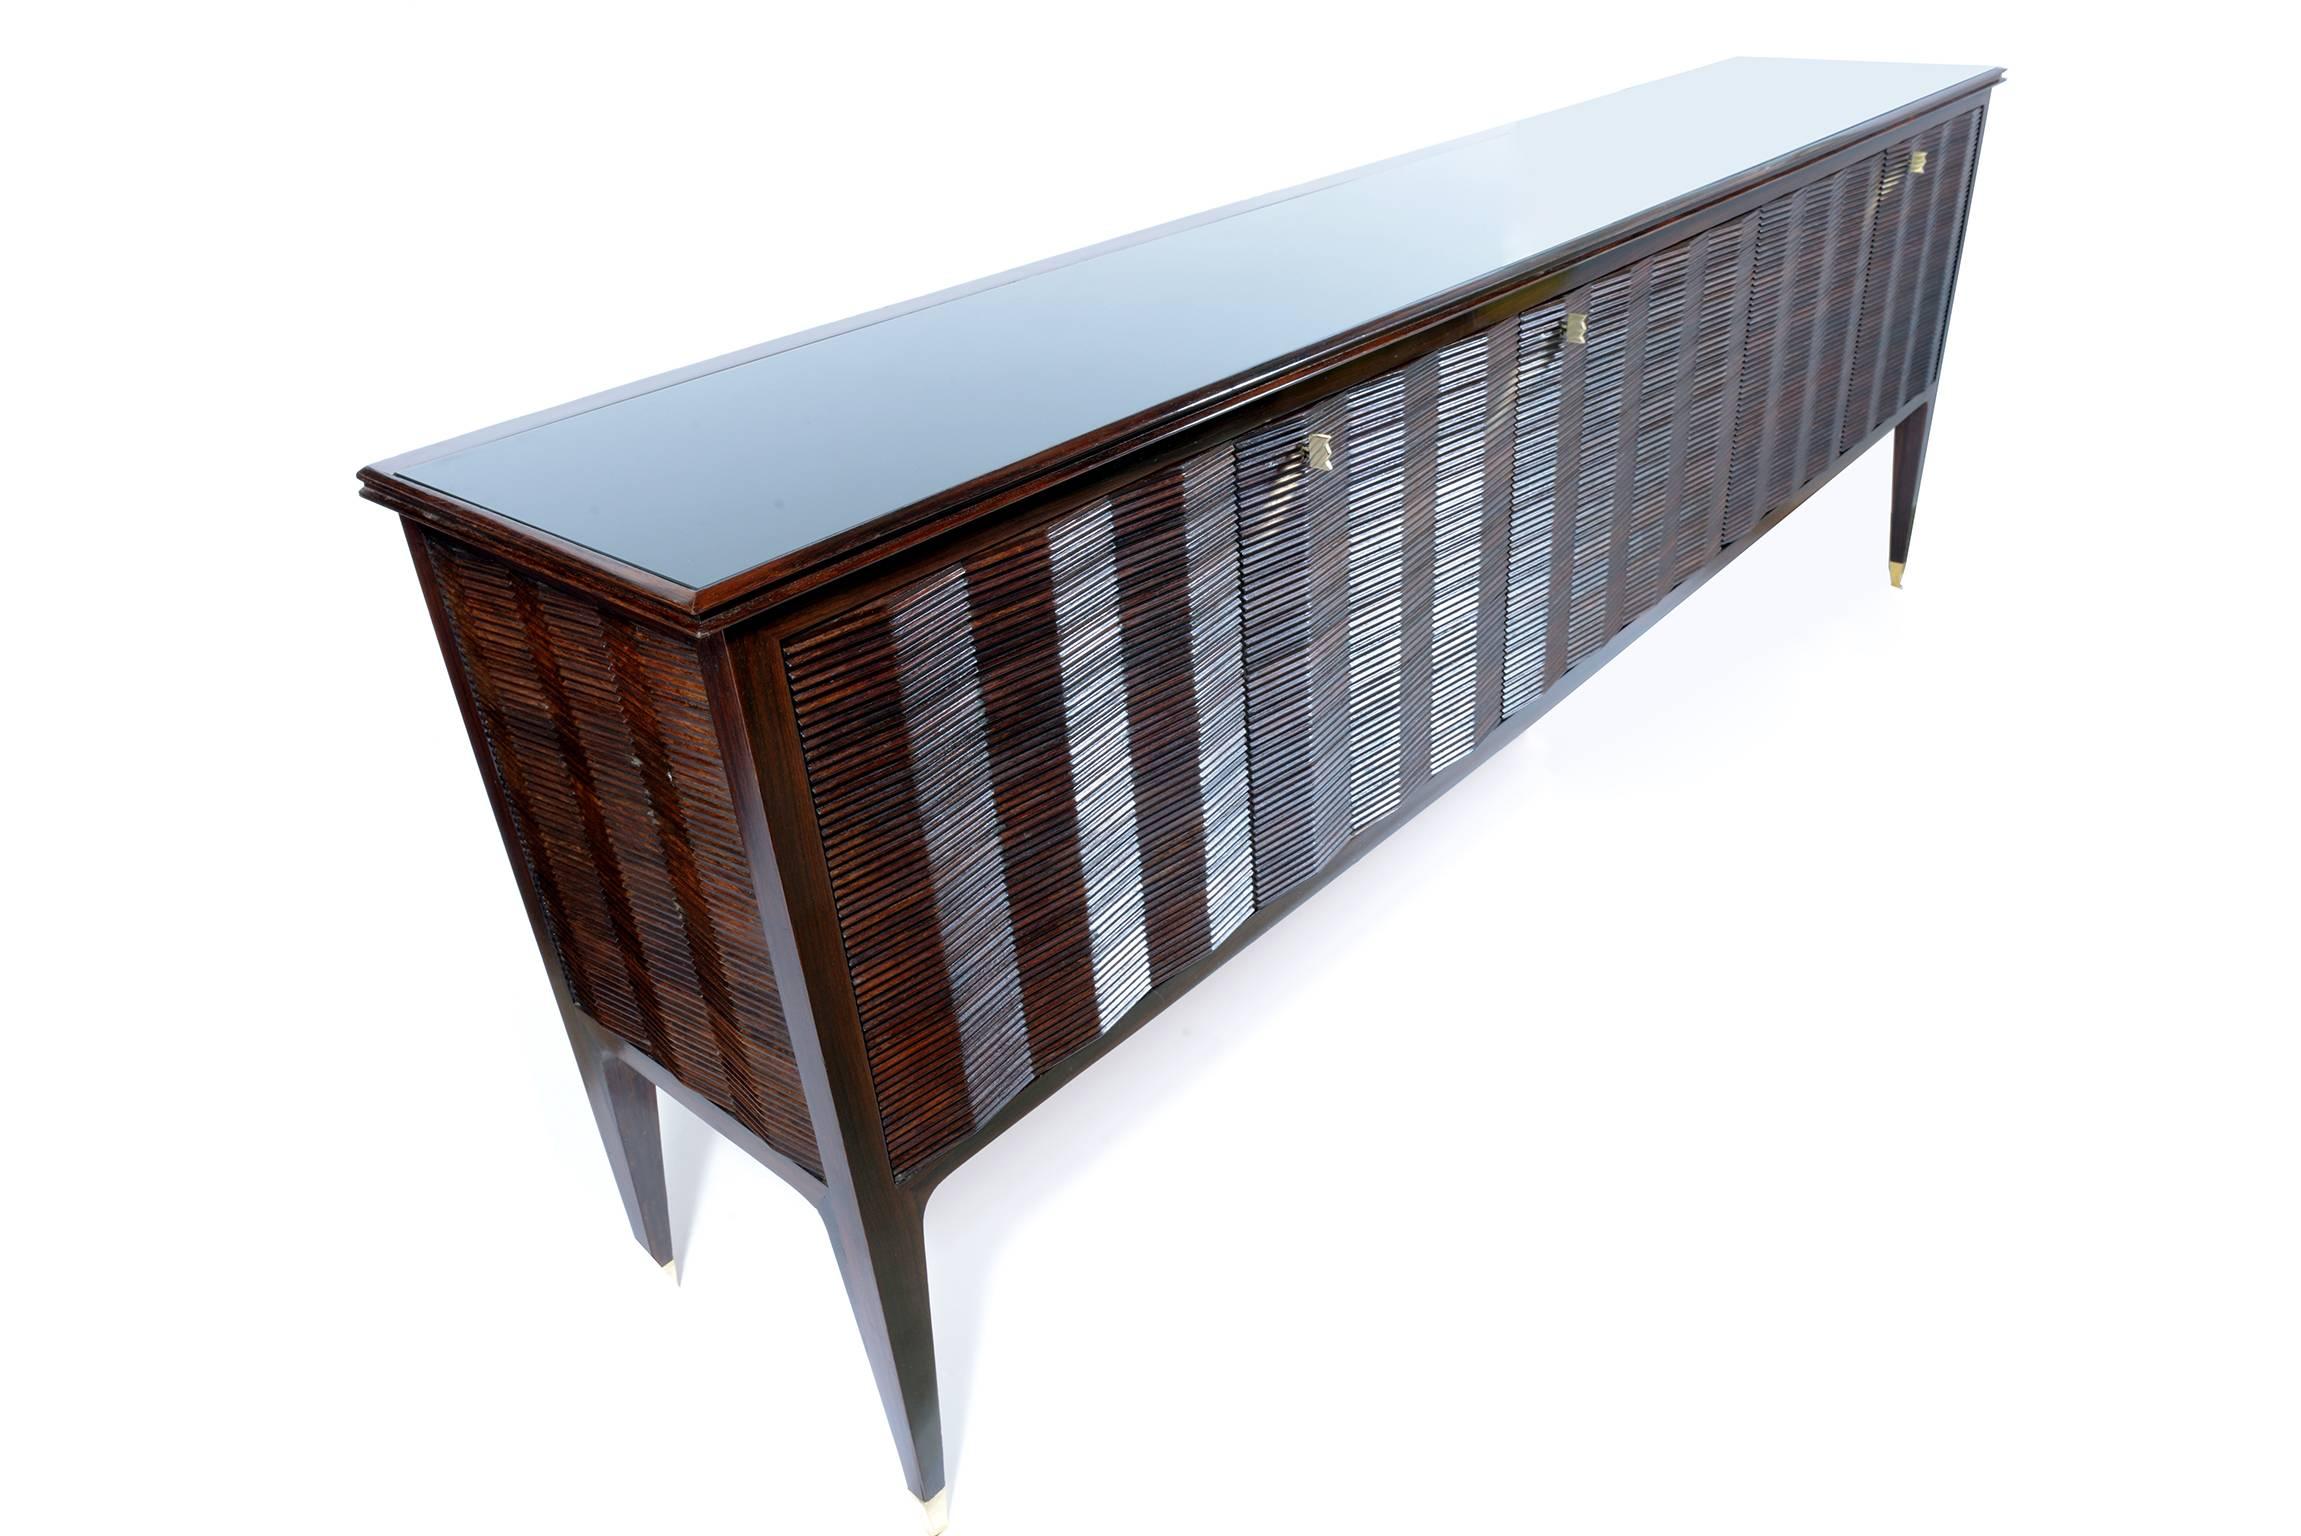 Elegant and unusual sideboard solid exotic precious grooved wood to create a repetition of corner, cuts brass beautiful shaped feet and keys.
Encased black glass top.
Interiors on cheerywood with shelves.
Signed.